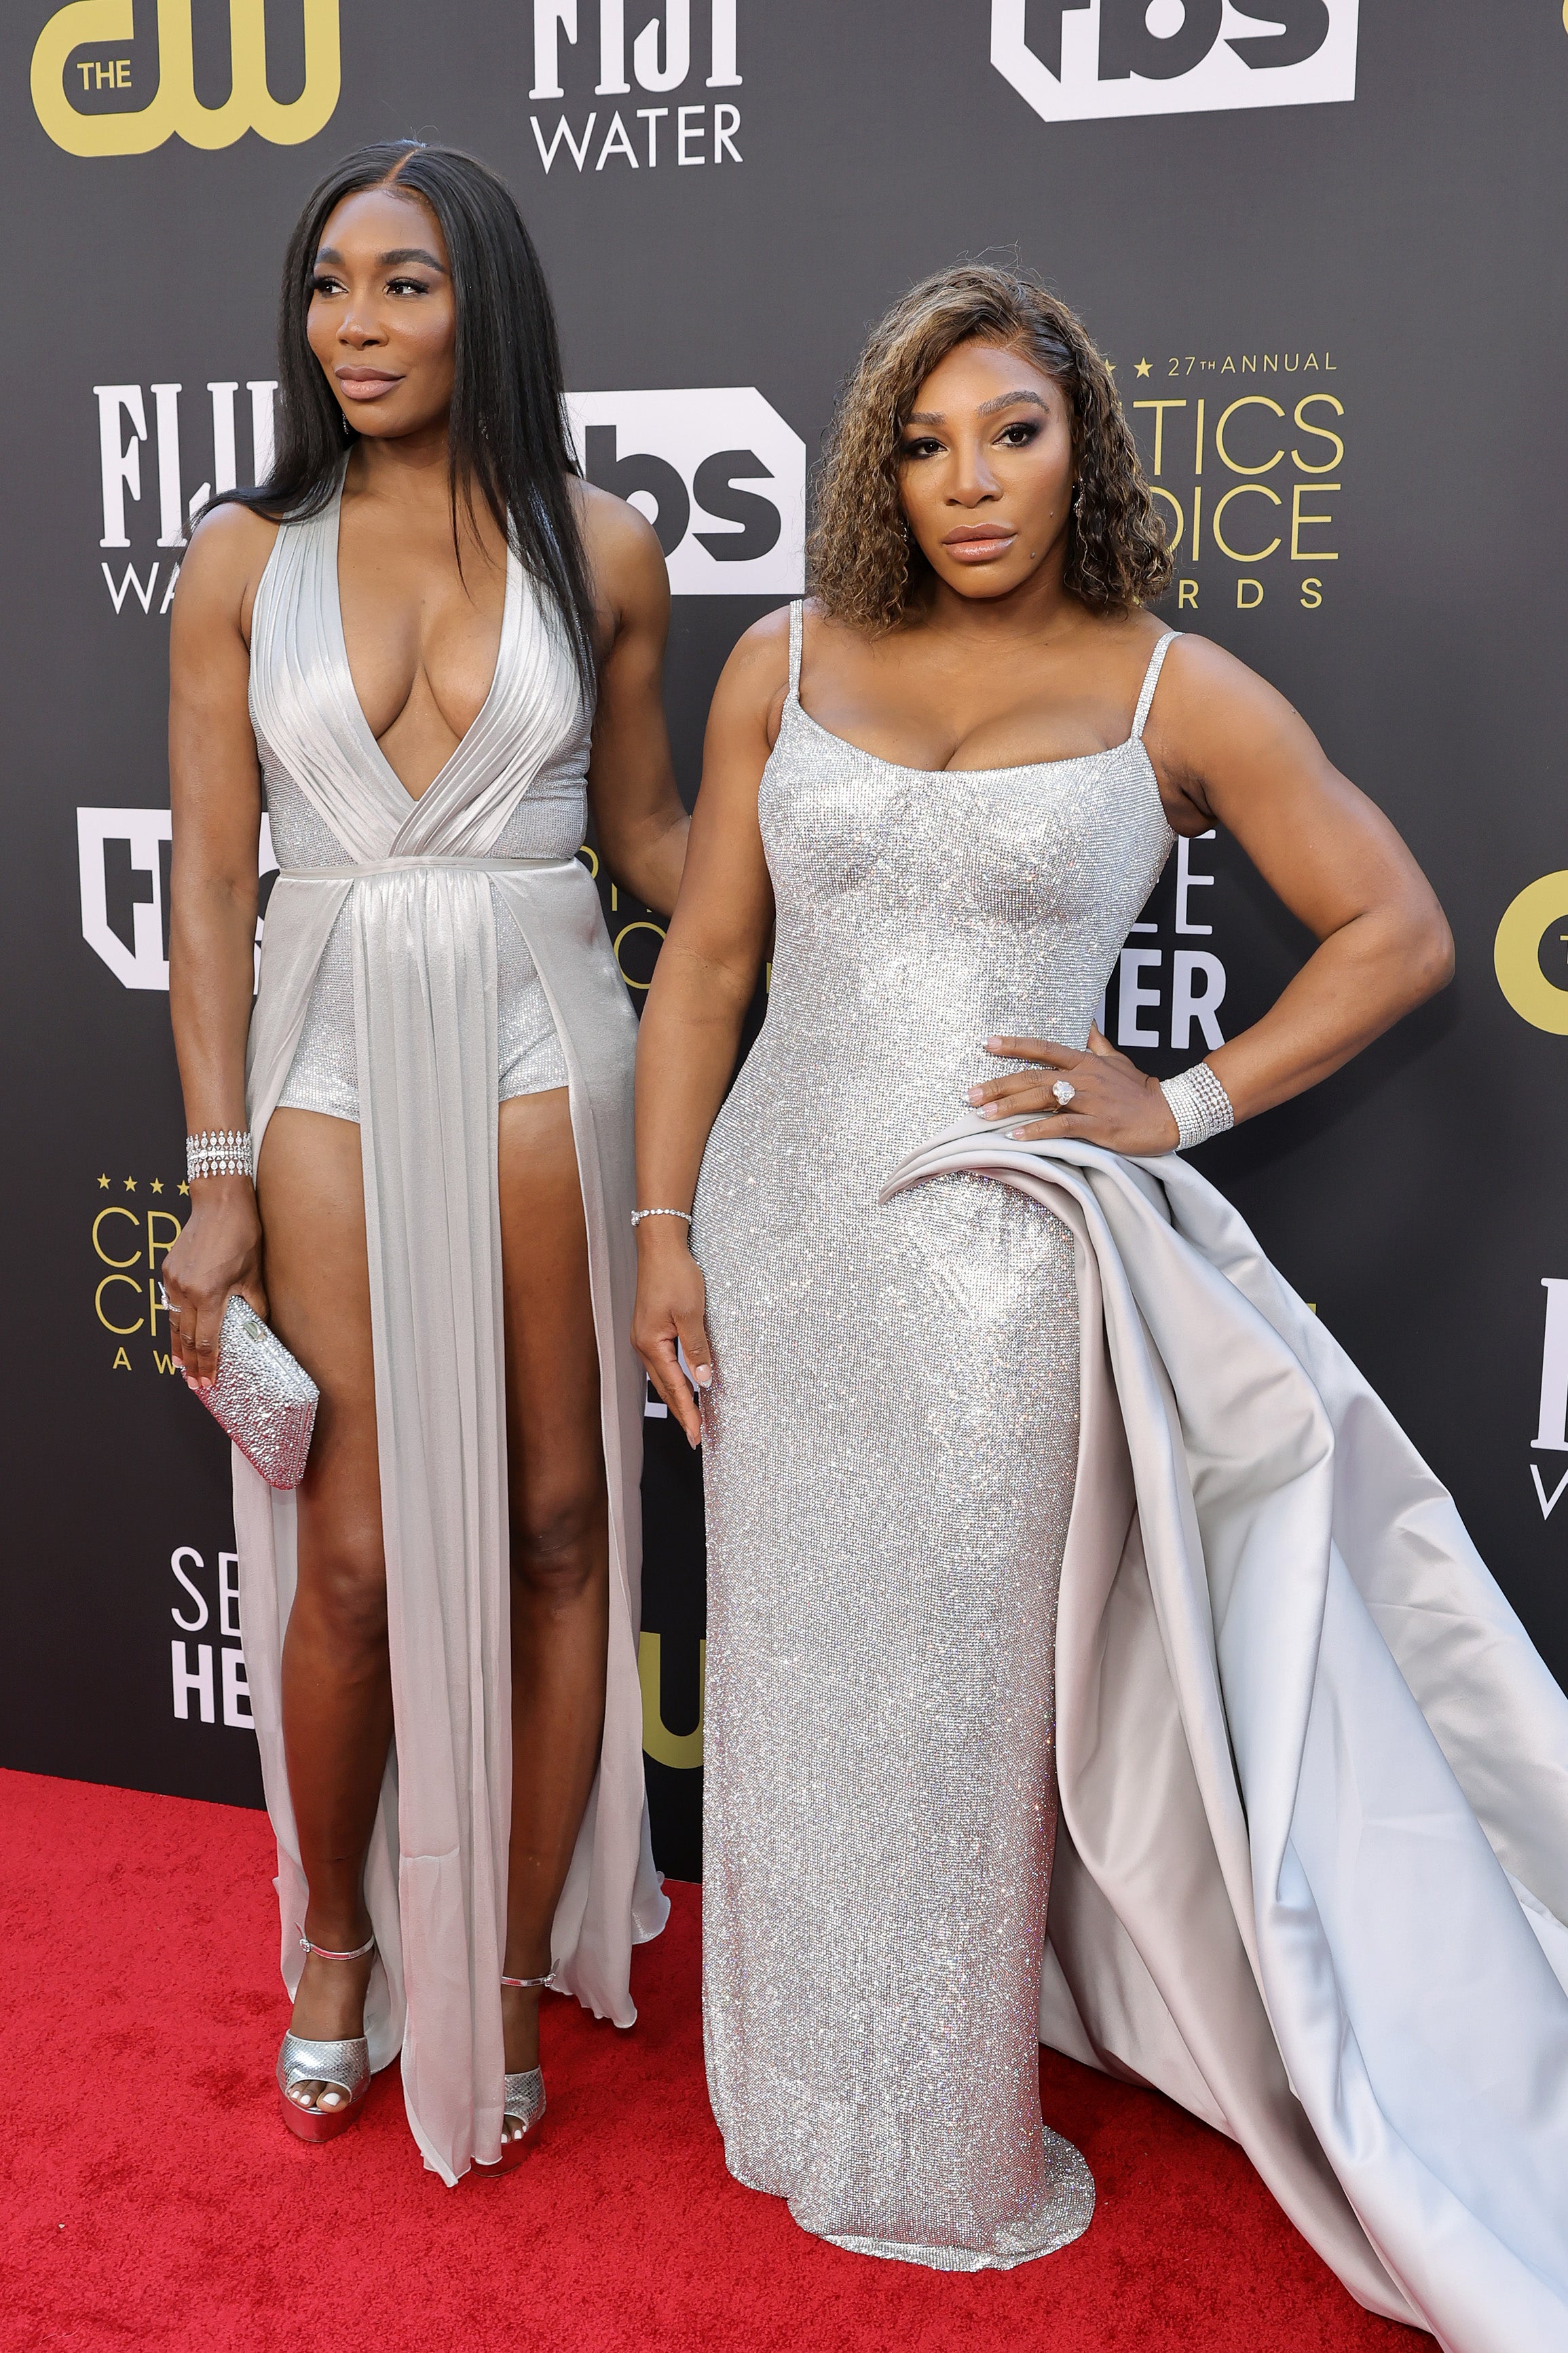 The sisters wore silver Versace gowns